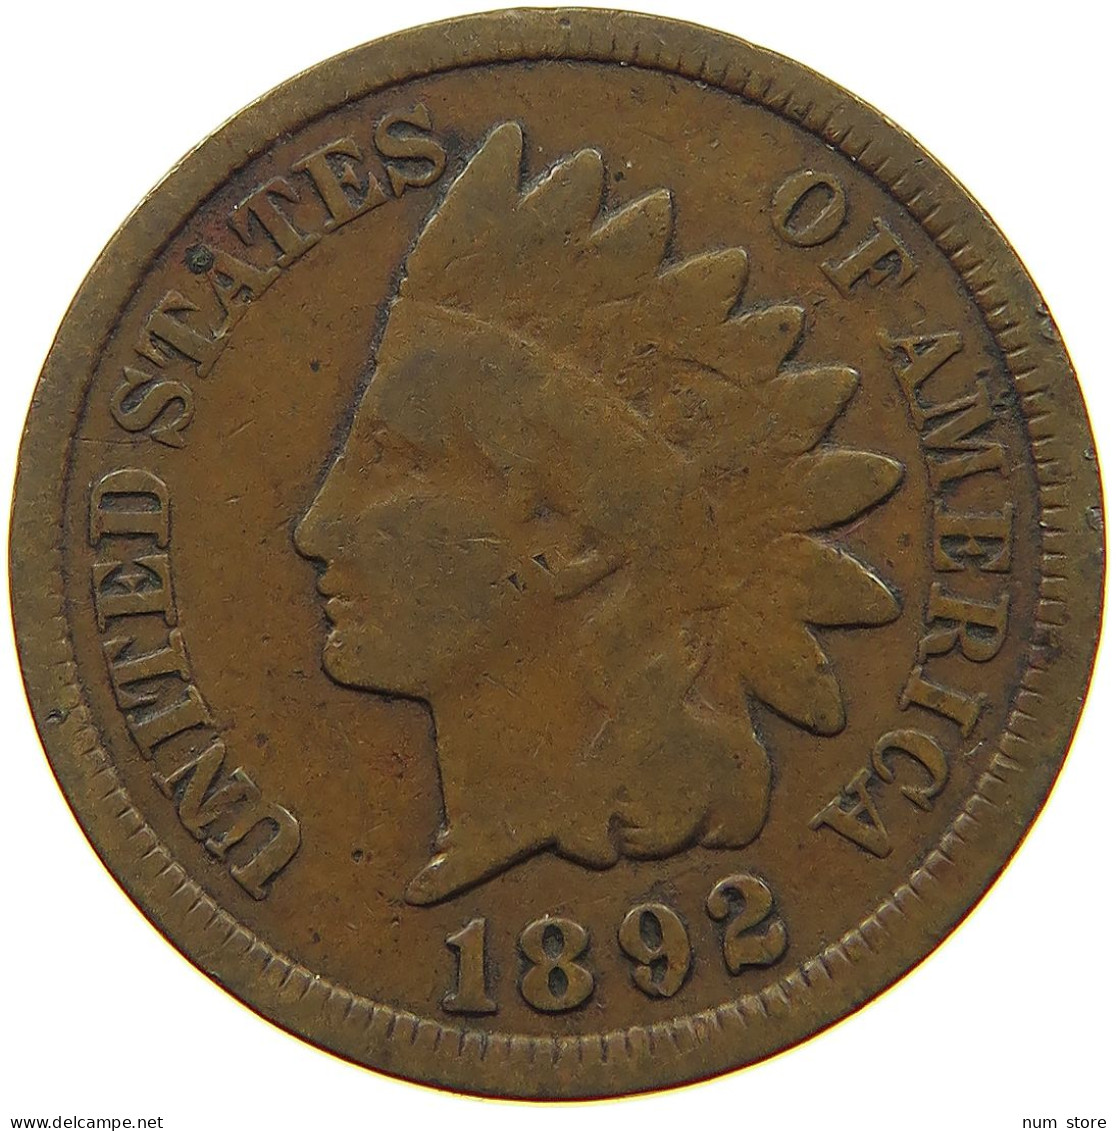 UNITED STATES OF AMERICA CENT 1892 INDIAN HEAD #s063 0425 - 1859-1909: Indian Head